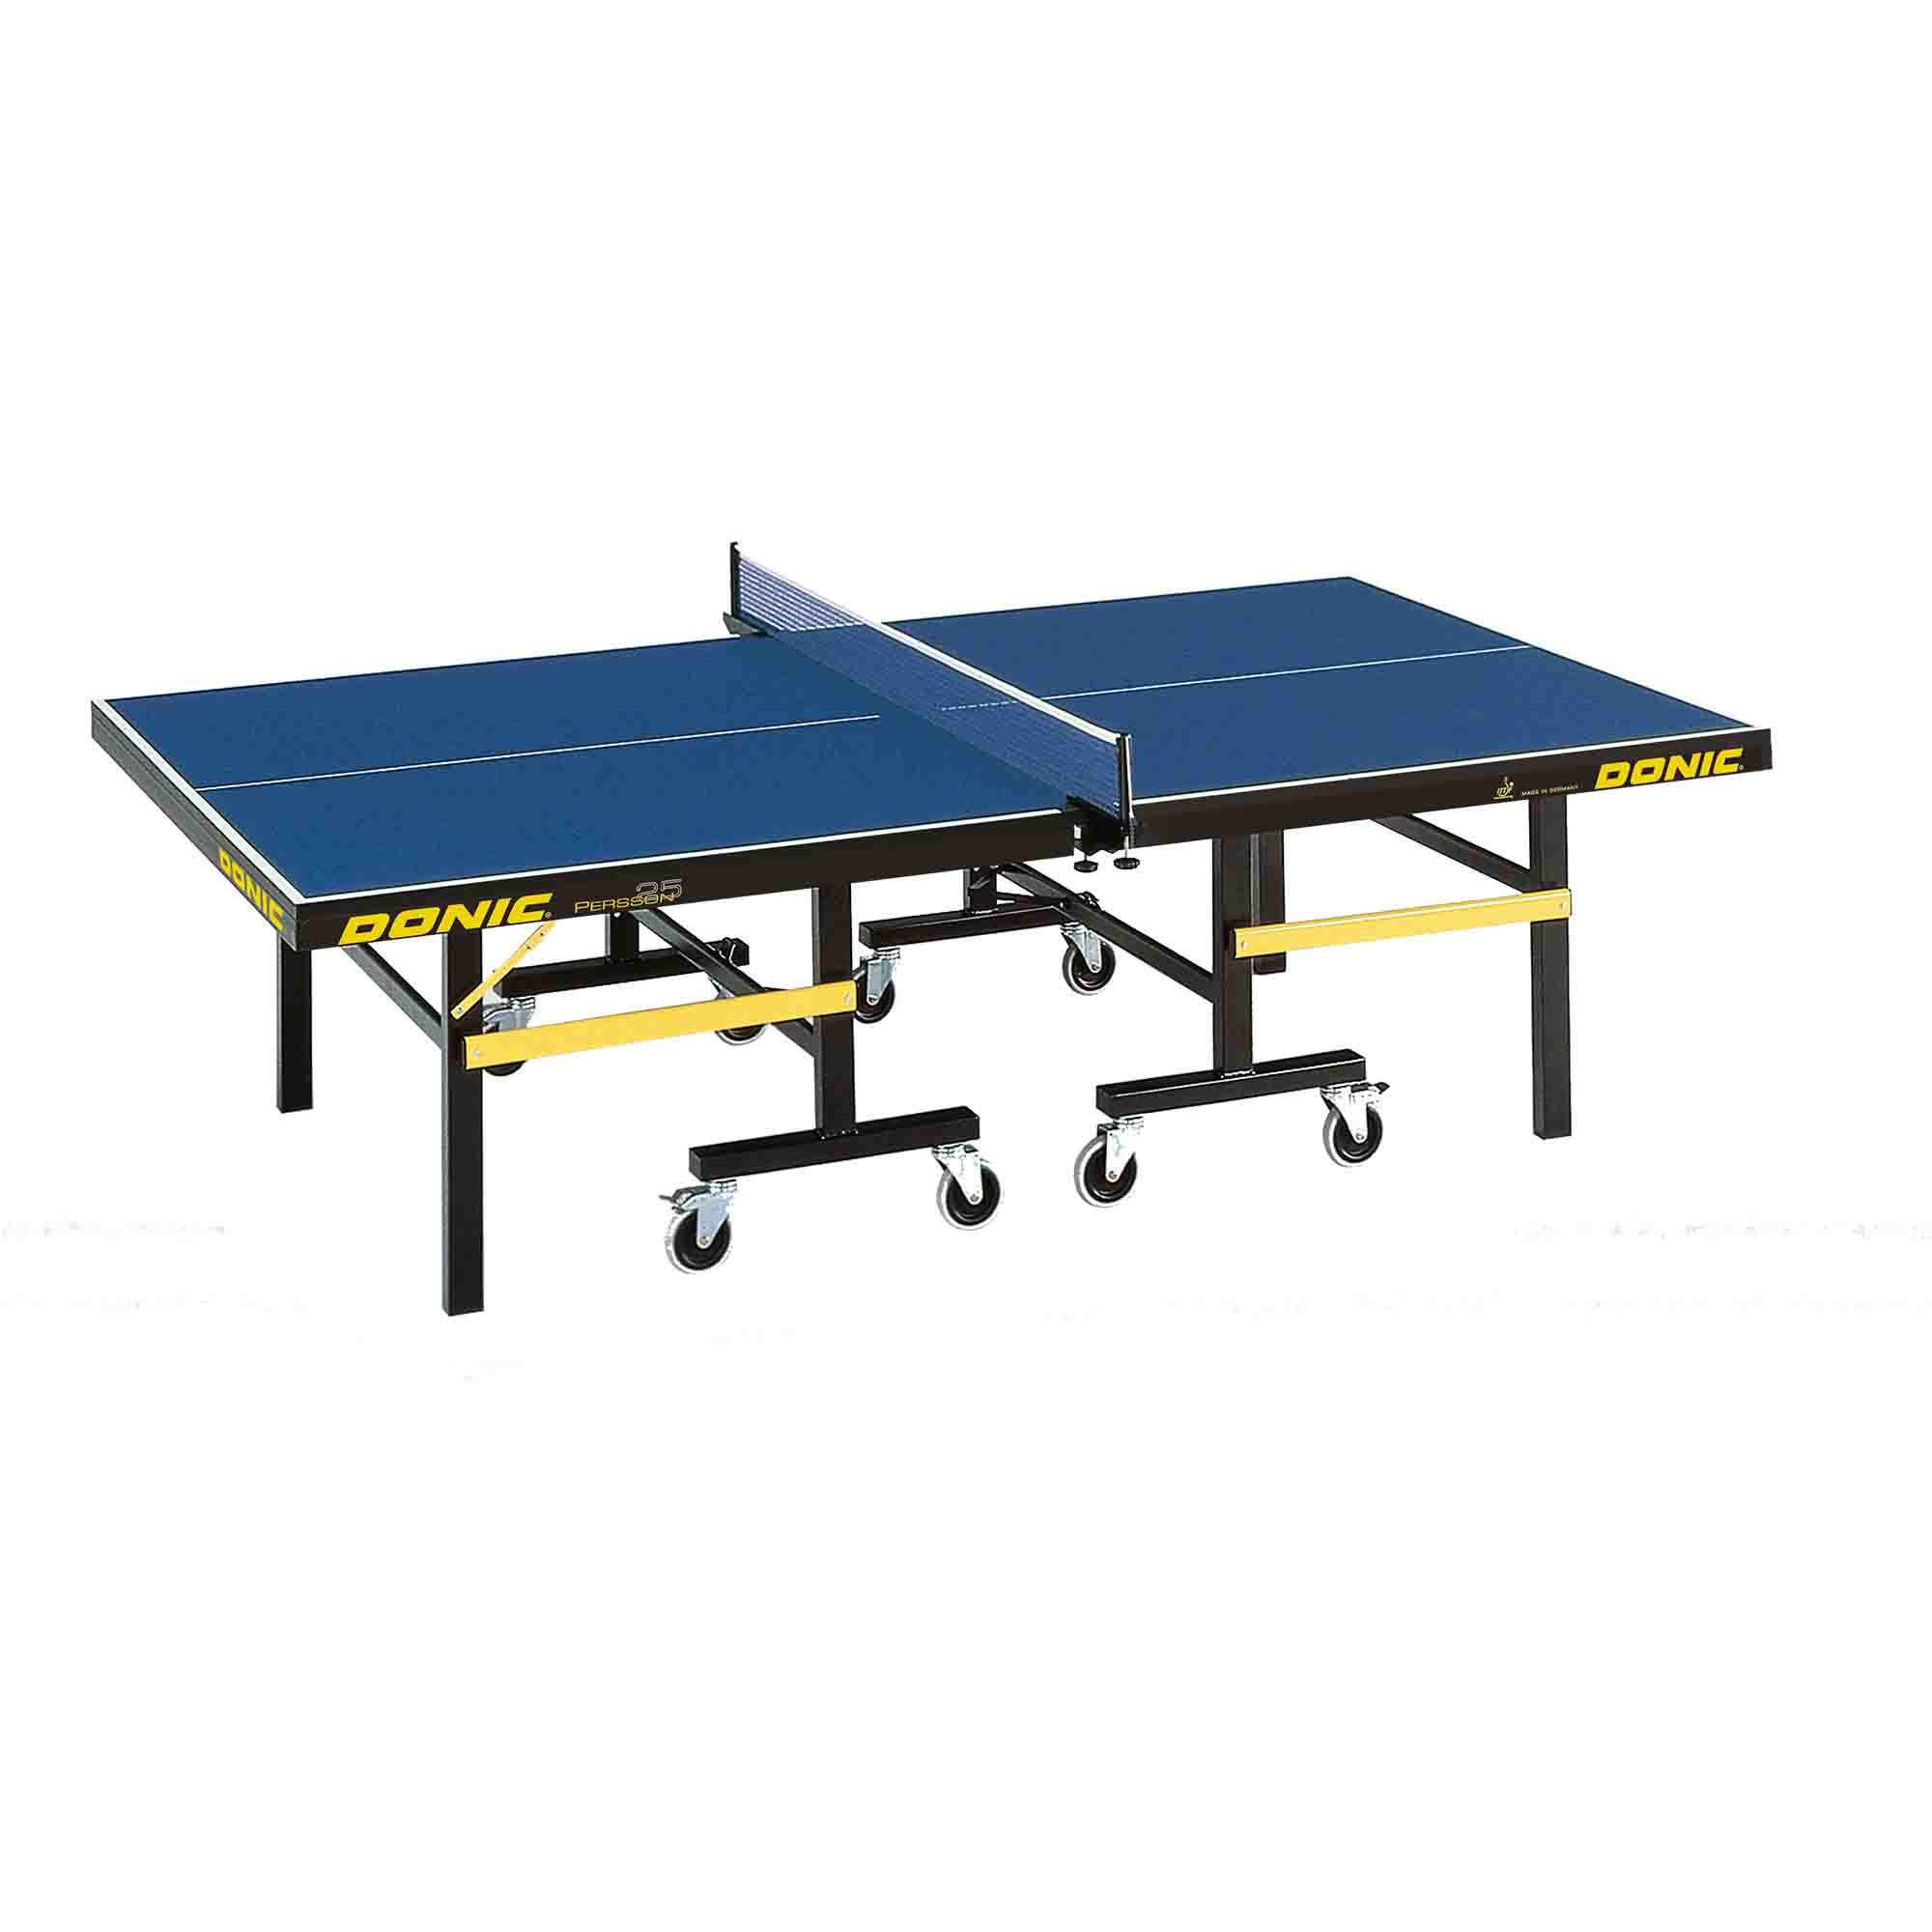 Donic Table Persson 25 blue